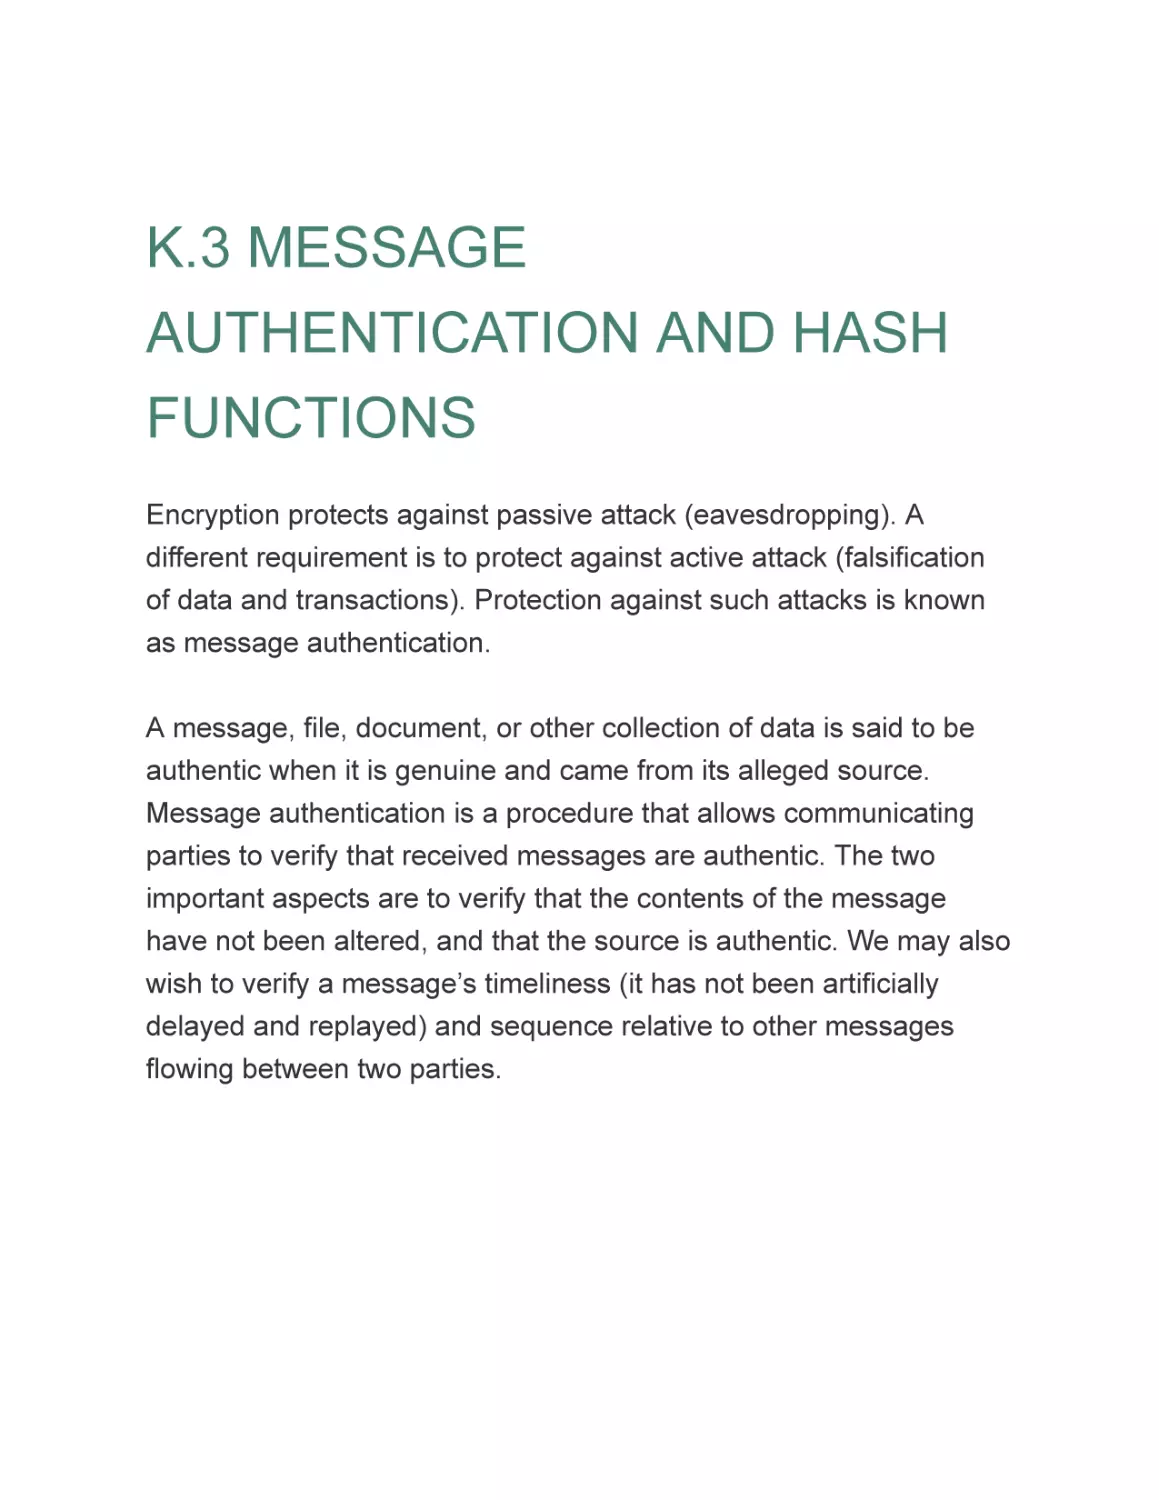 K.3 MESSAGE AUTHENTICATION AND HASH FUNCTIONS